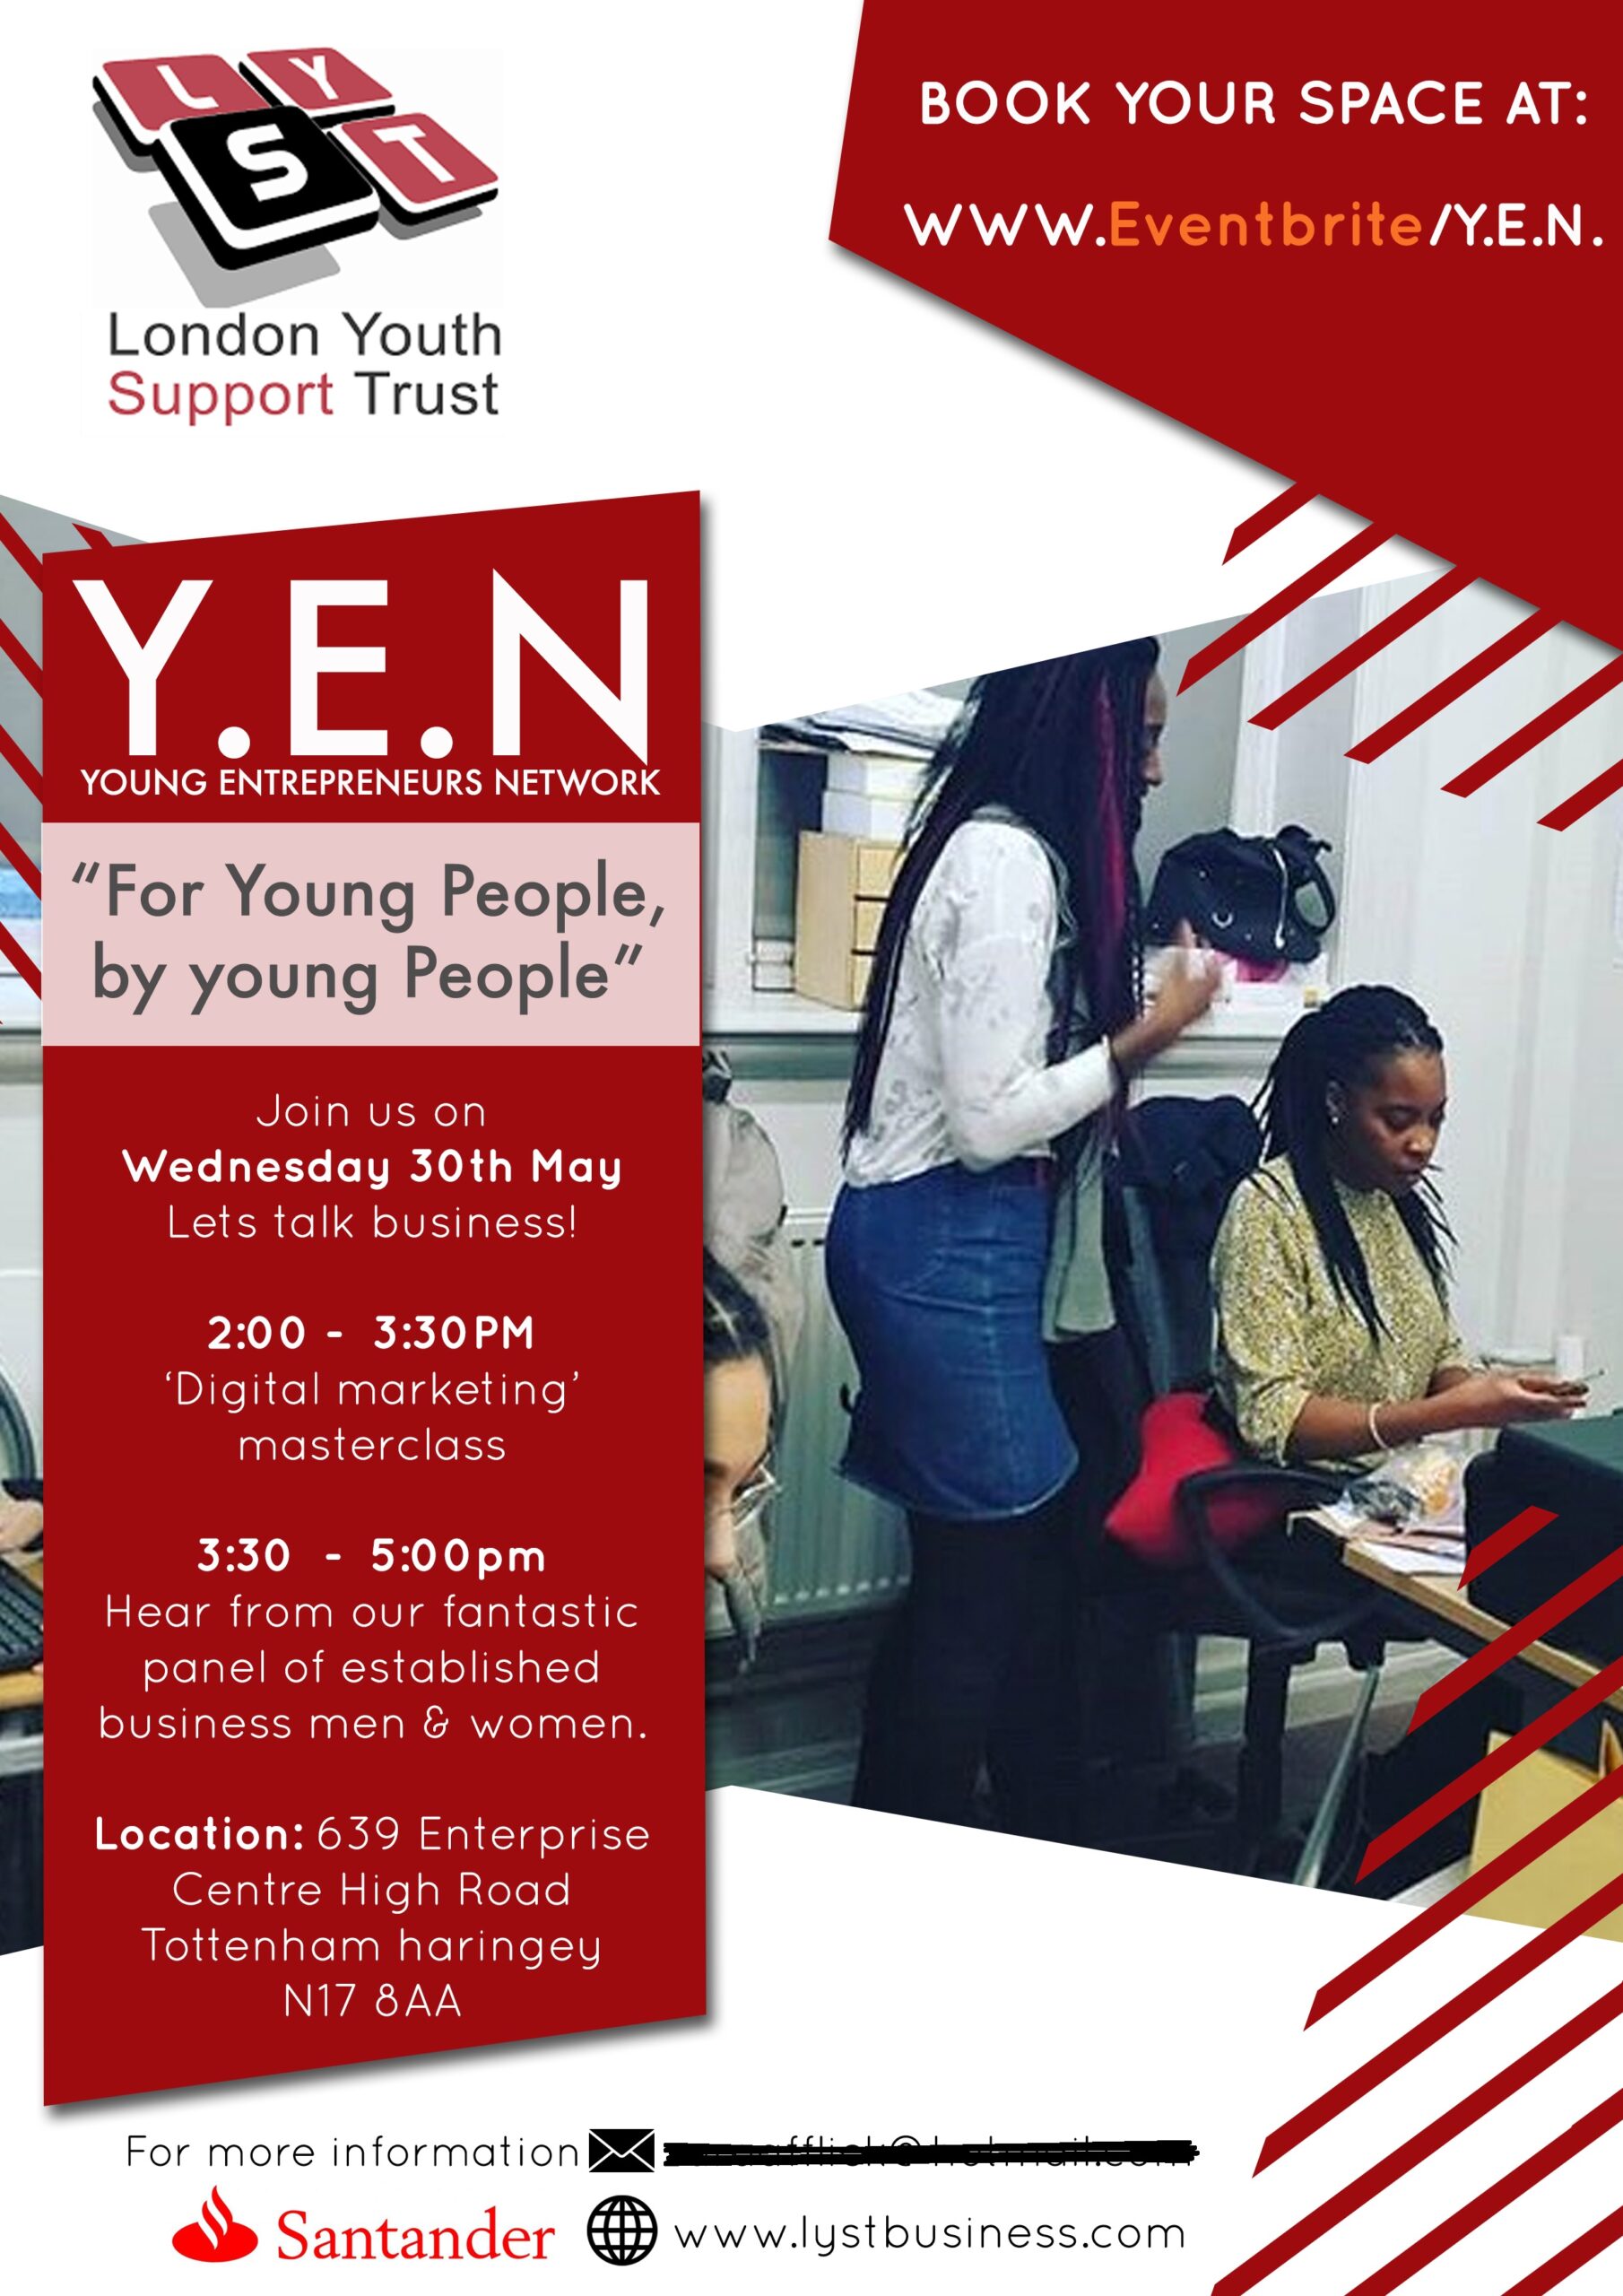 London Youth Support Trust - Young Entrepreneurs Network - DMT Solutions